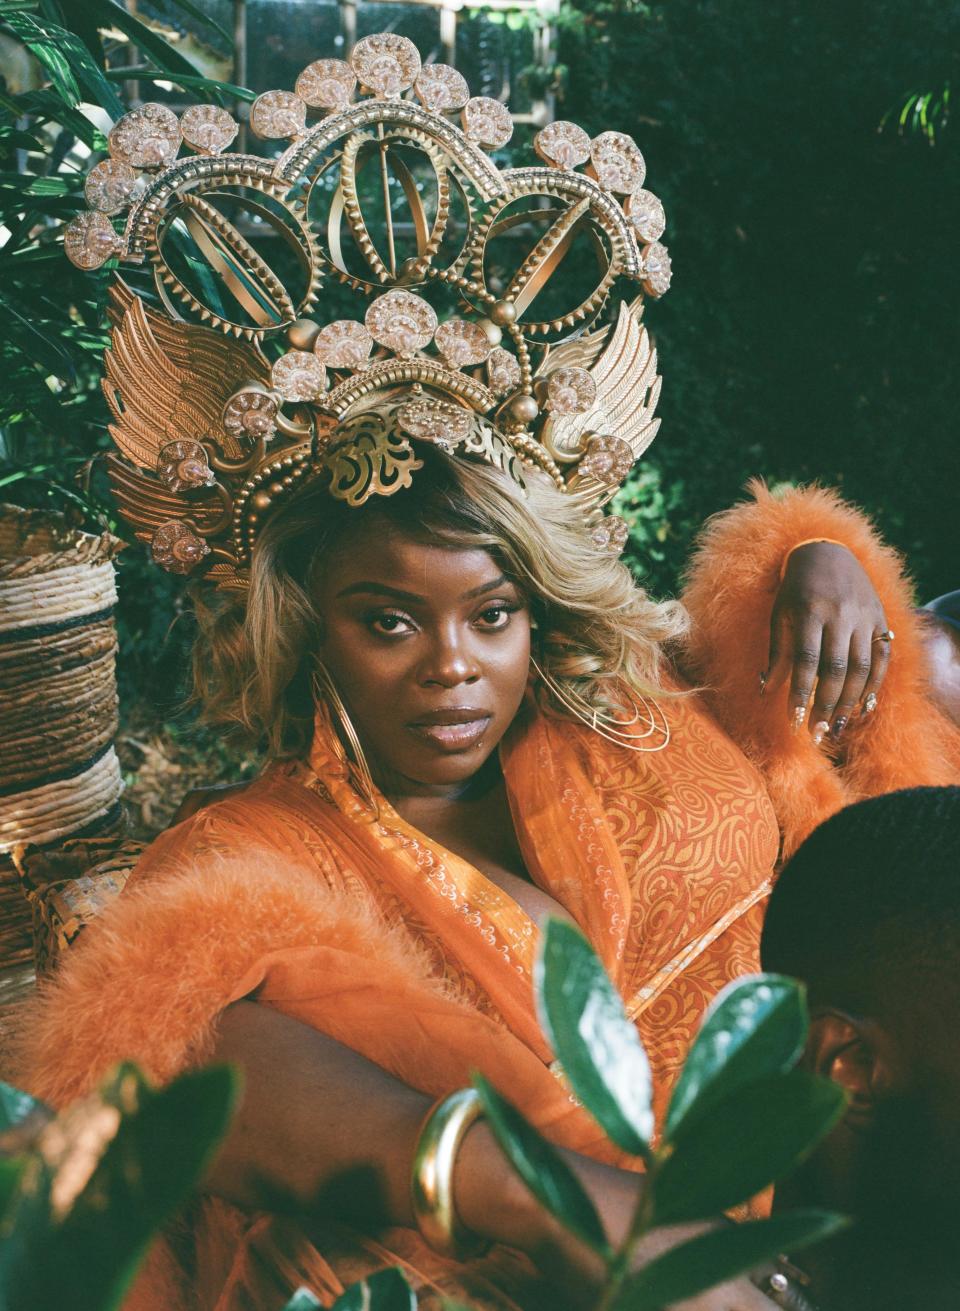 "My Way," six-time Grammy-nominee Yola's latest EP, arrives soon.